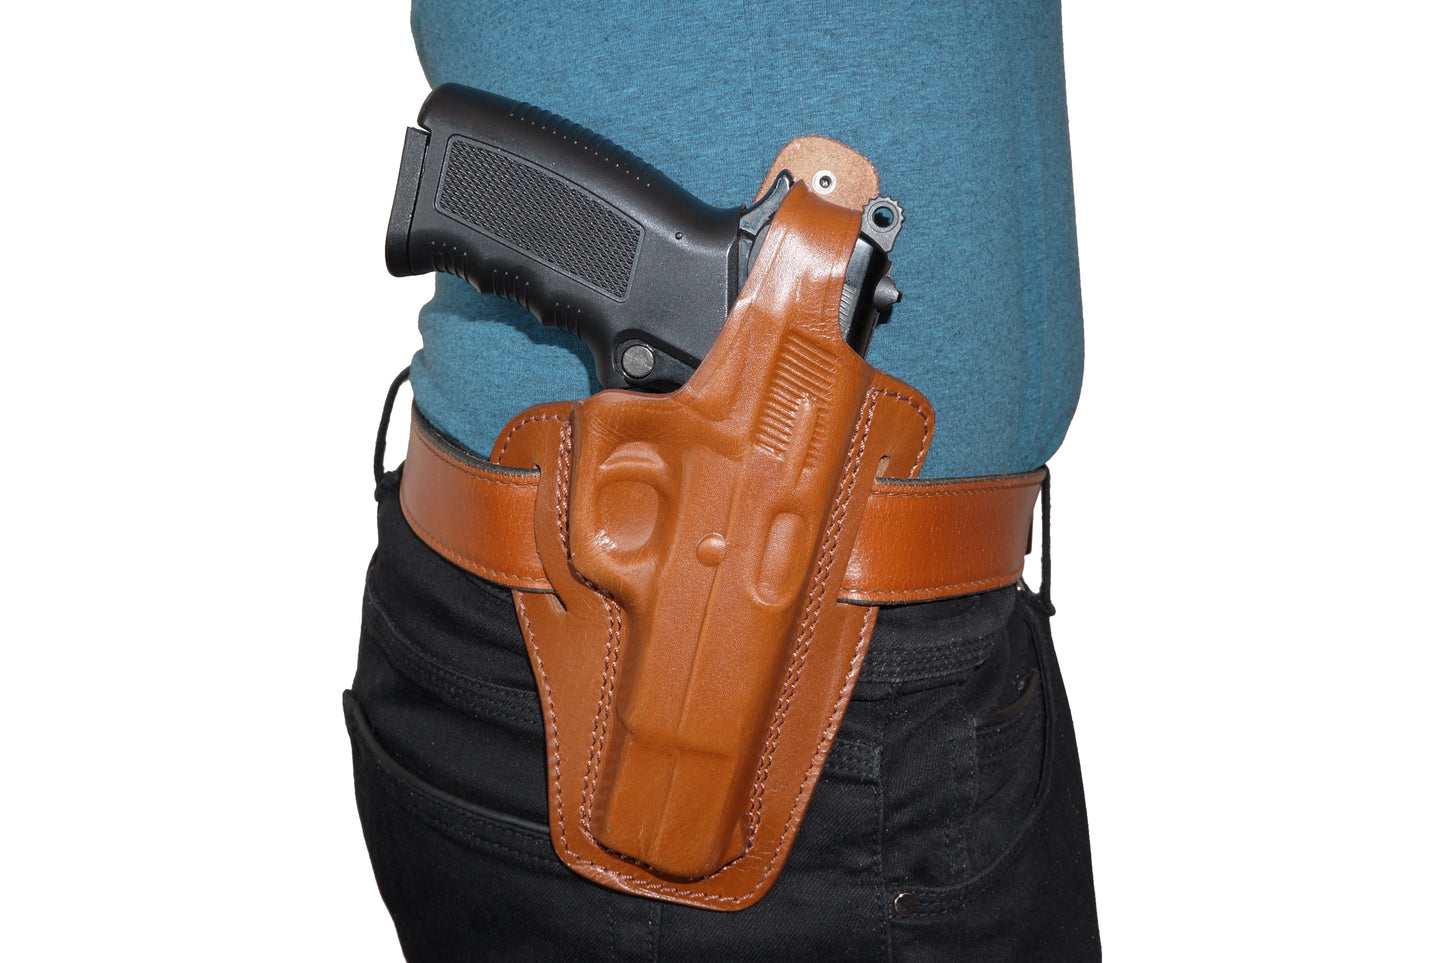 2 Slot Pancake Leather Holster Thumb Break Closed-end RH & Single Magazine Pouch Fits Browning HP Handmade! (#K30905)